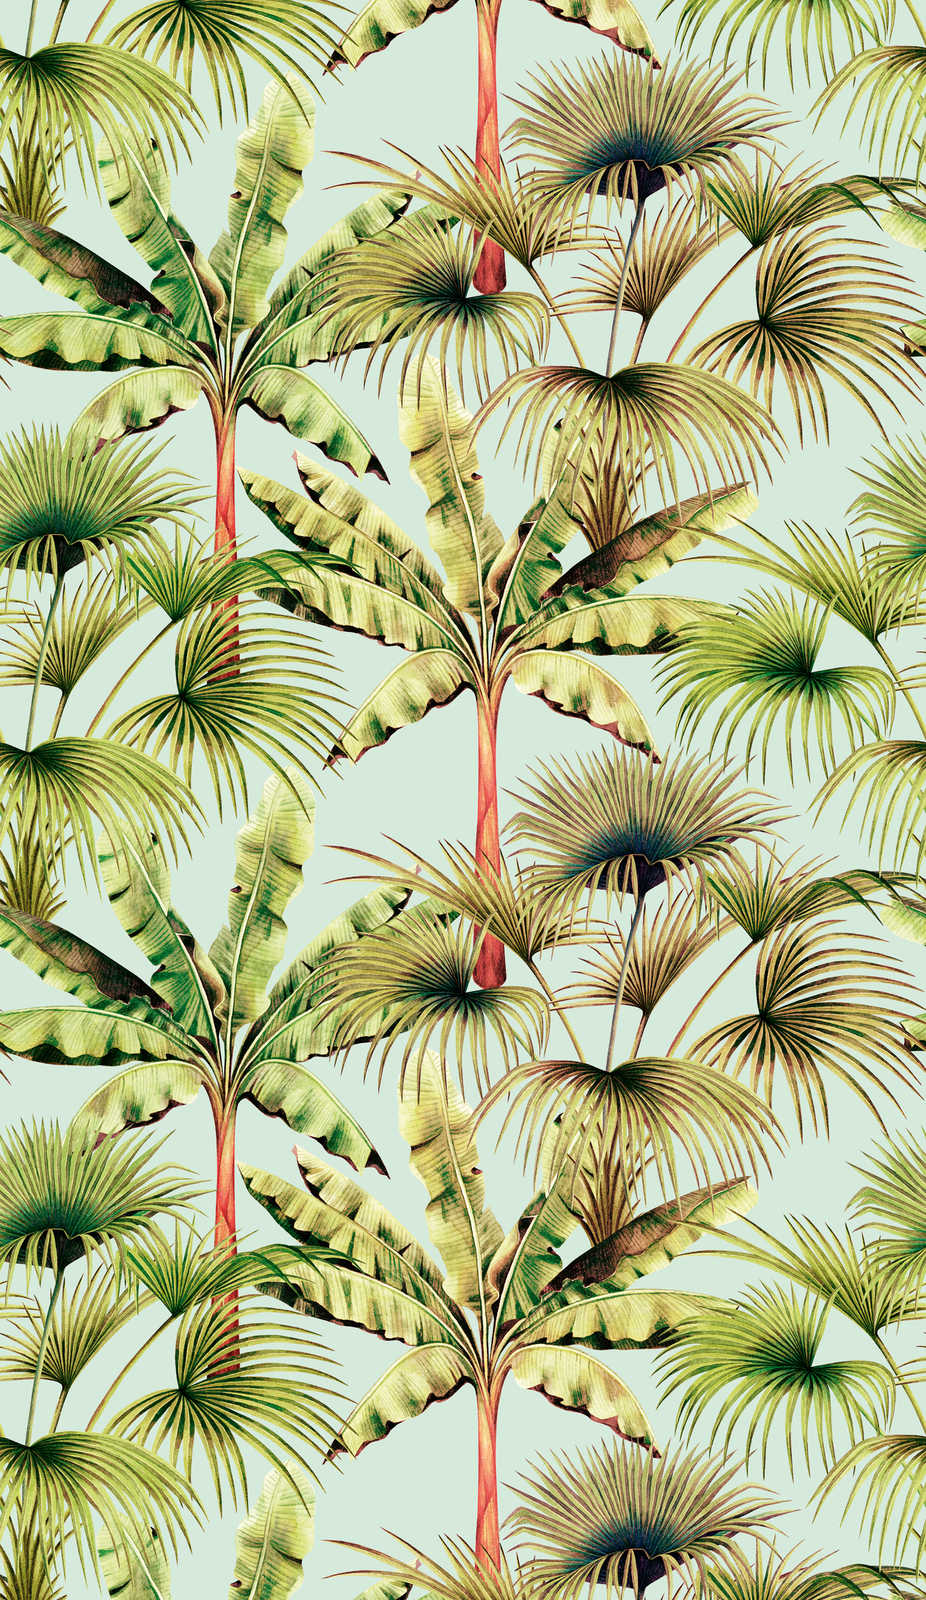             Colourful non-woven wallpaper with leaf pattern - light blue, green, red
        